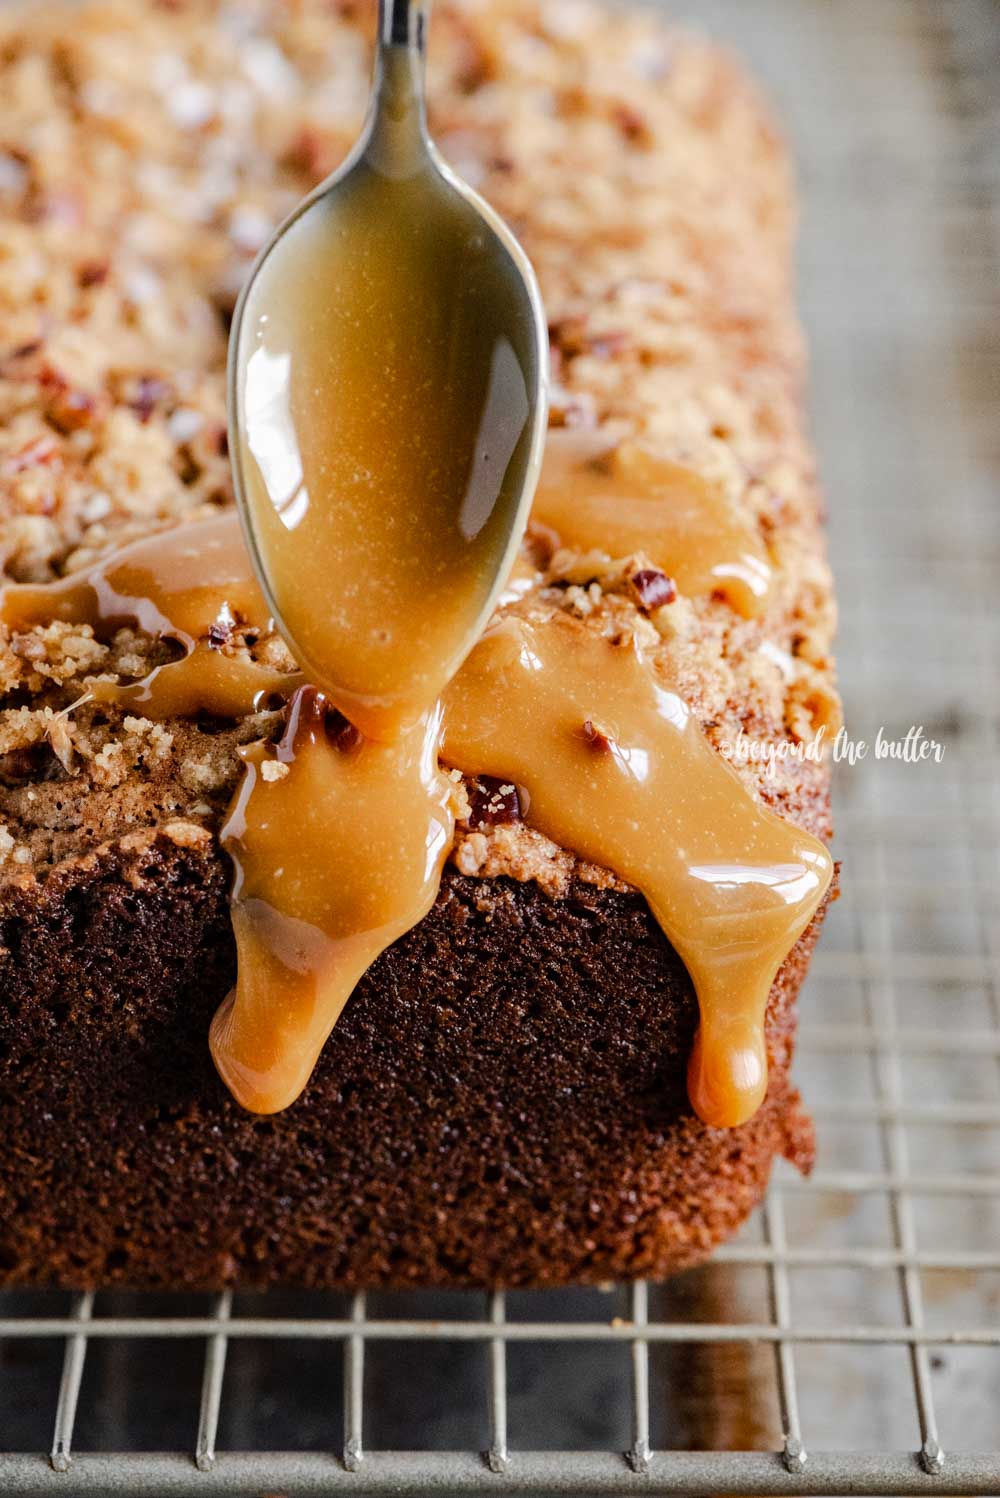 Angled image of salted caramel banana nut bread loaves on a wire cooling rack with caramel drizzled over the top | All Images © Beyond the Butter™